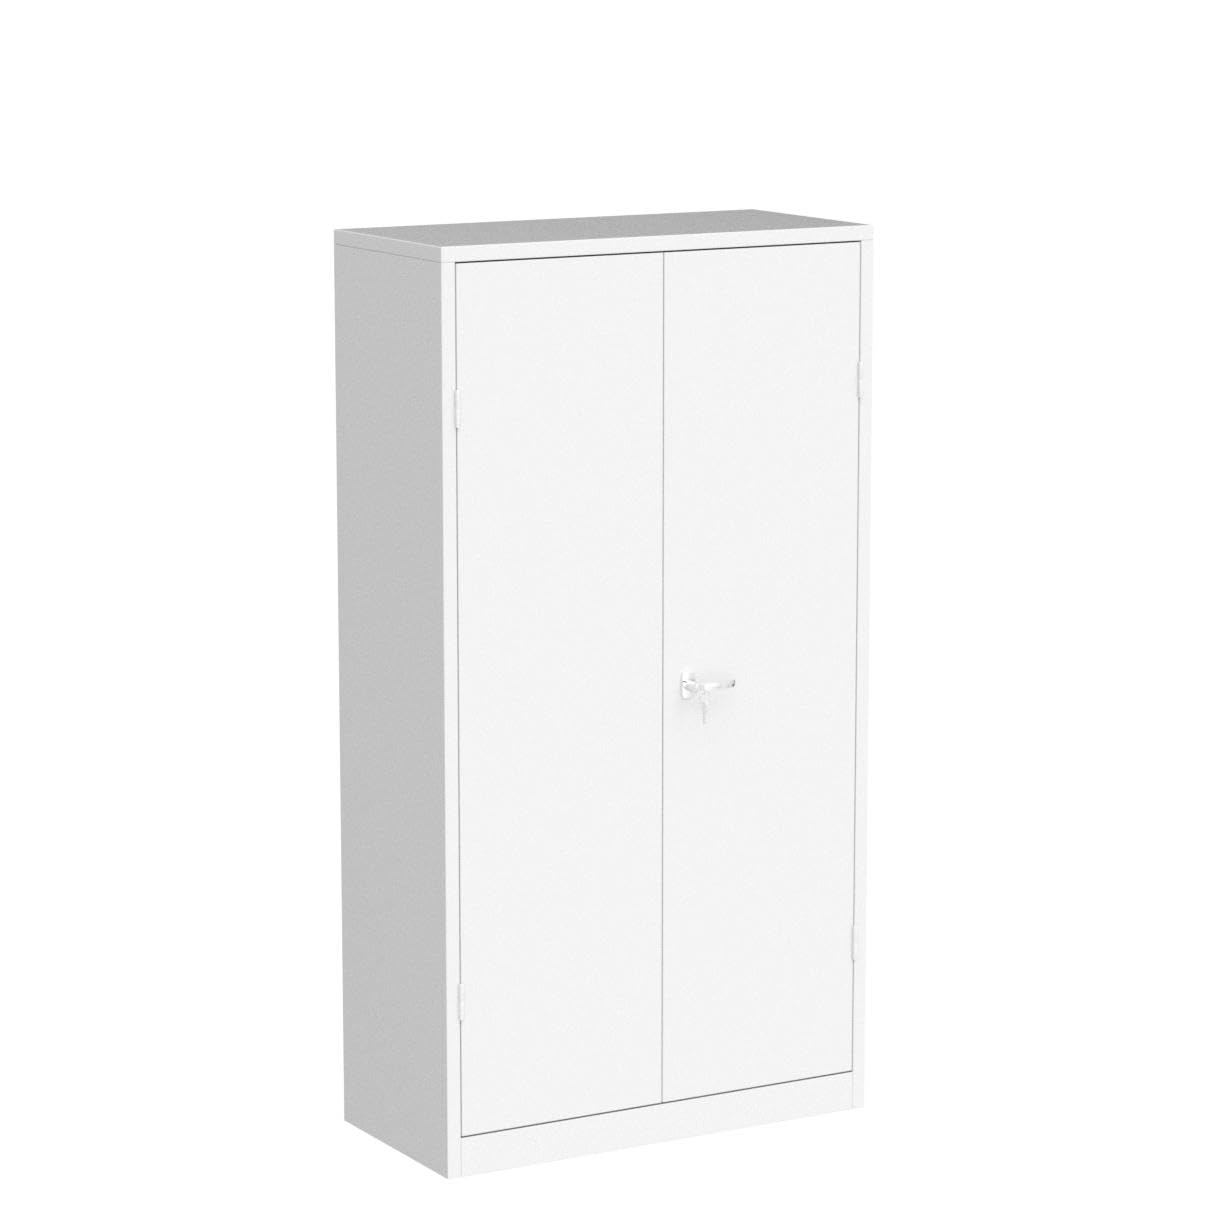 Greenvelly Metal Locking Storage Cabinet, 72" with Doors and 4 Shelves, Large Steel Tall Lockable Tool, Office Cabinet with Lock and 2 Keys for Home,